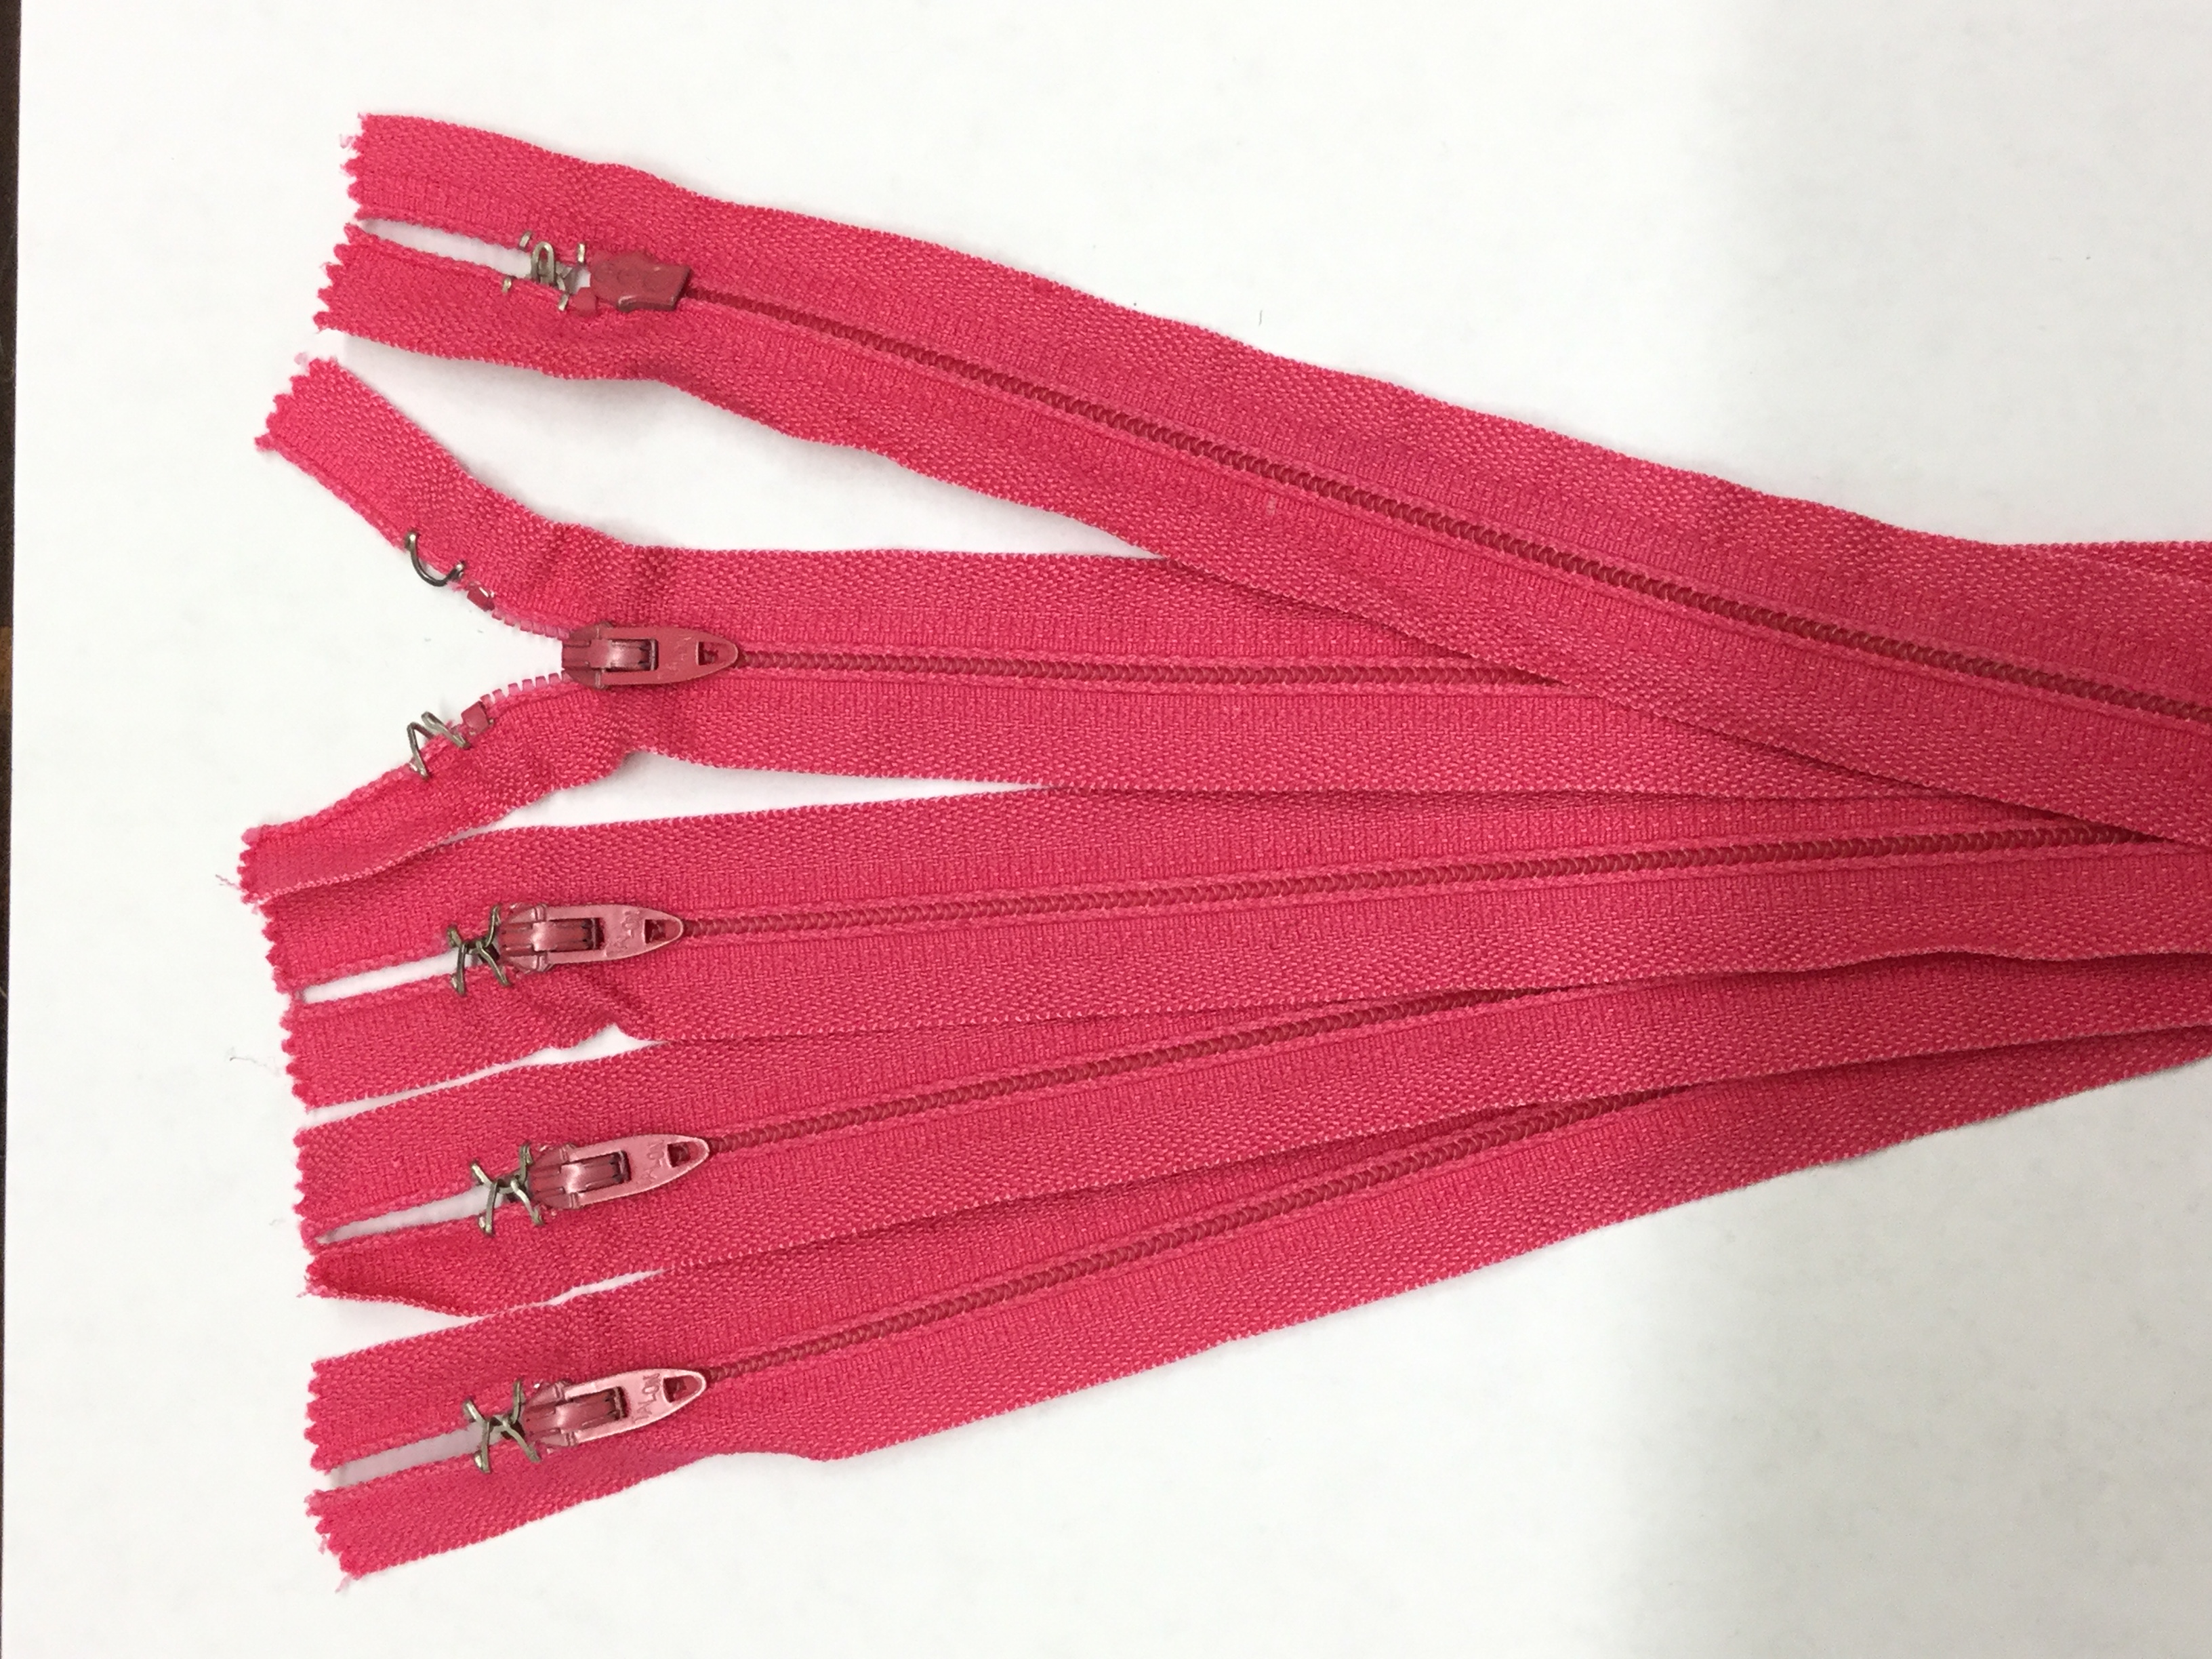 08 inch - Talon Nylon Coil Metal Pull Zipper with Hook and Loop - Dark Pink